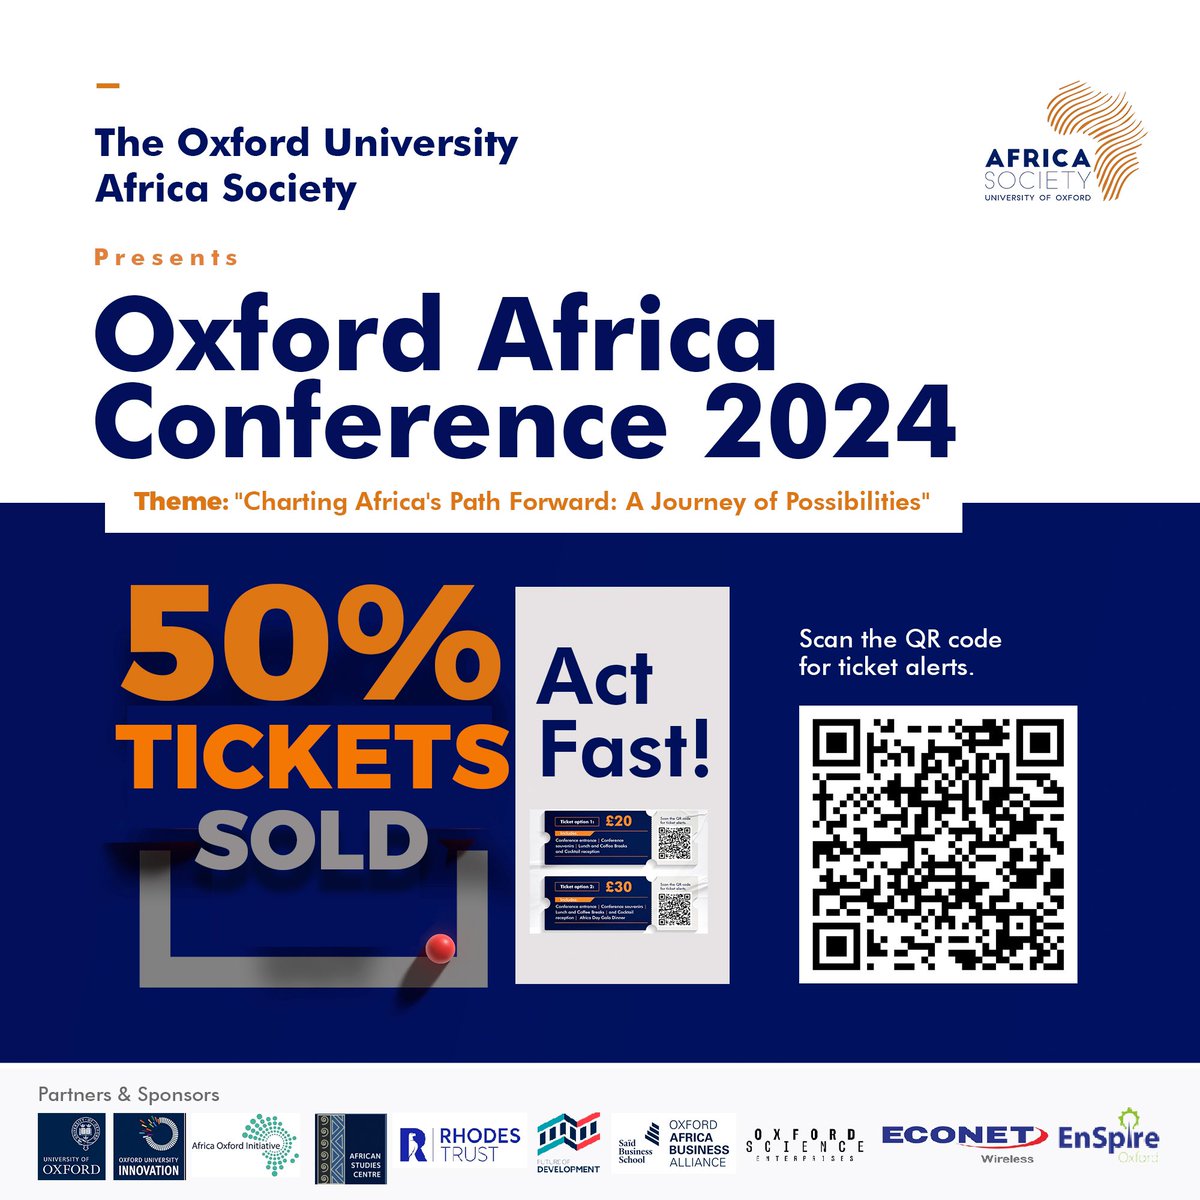 🎉 Don't miss out! 50% of tickets for Oxford Africa Conference 2024 have been sold! Secure your spot now and be part of shaping Africa's future.  👉 Act Now: oxforduniversityafricasociety.com/oxford-africa-… #OxfordAfricaConference2024 #ISF2024 🎟️